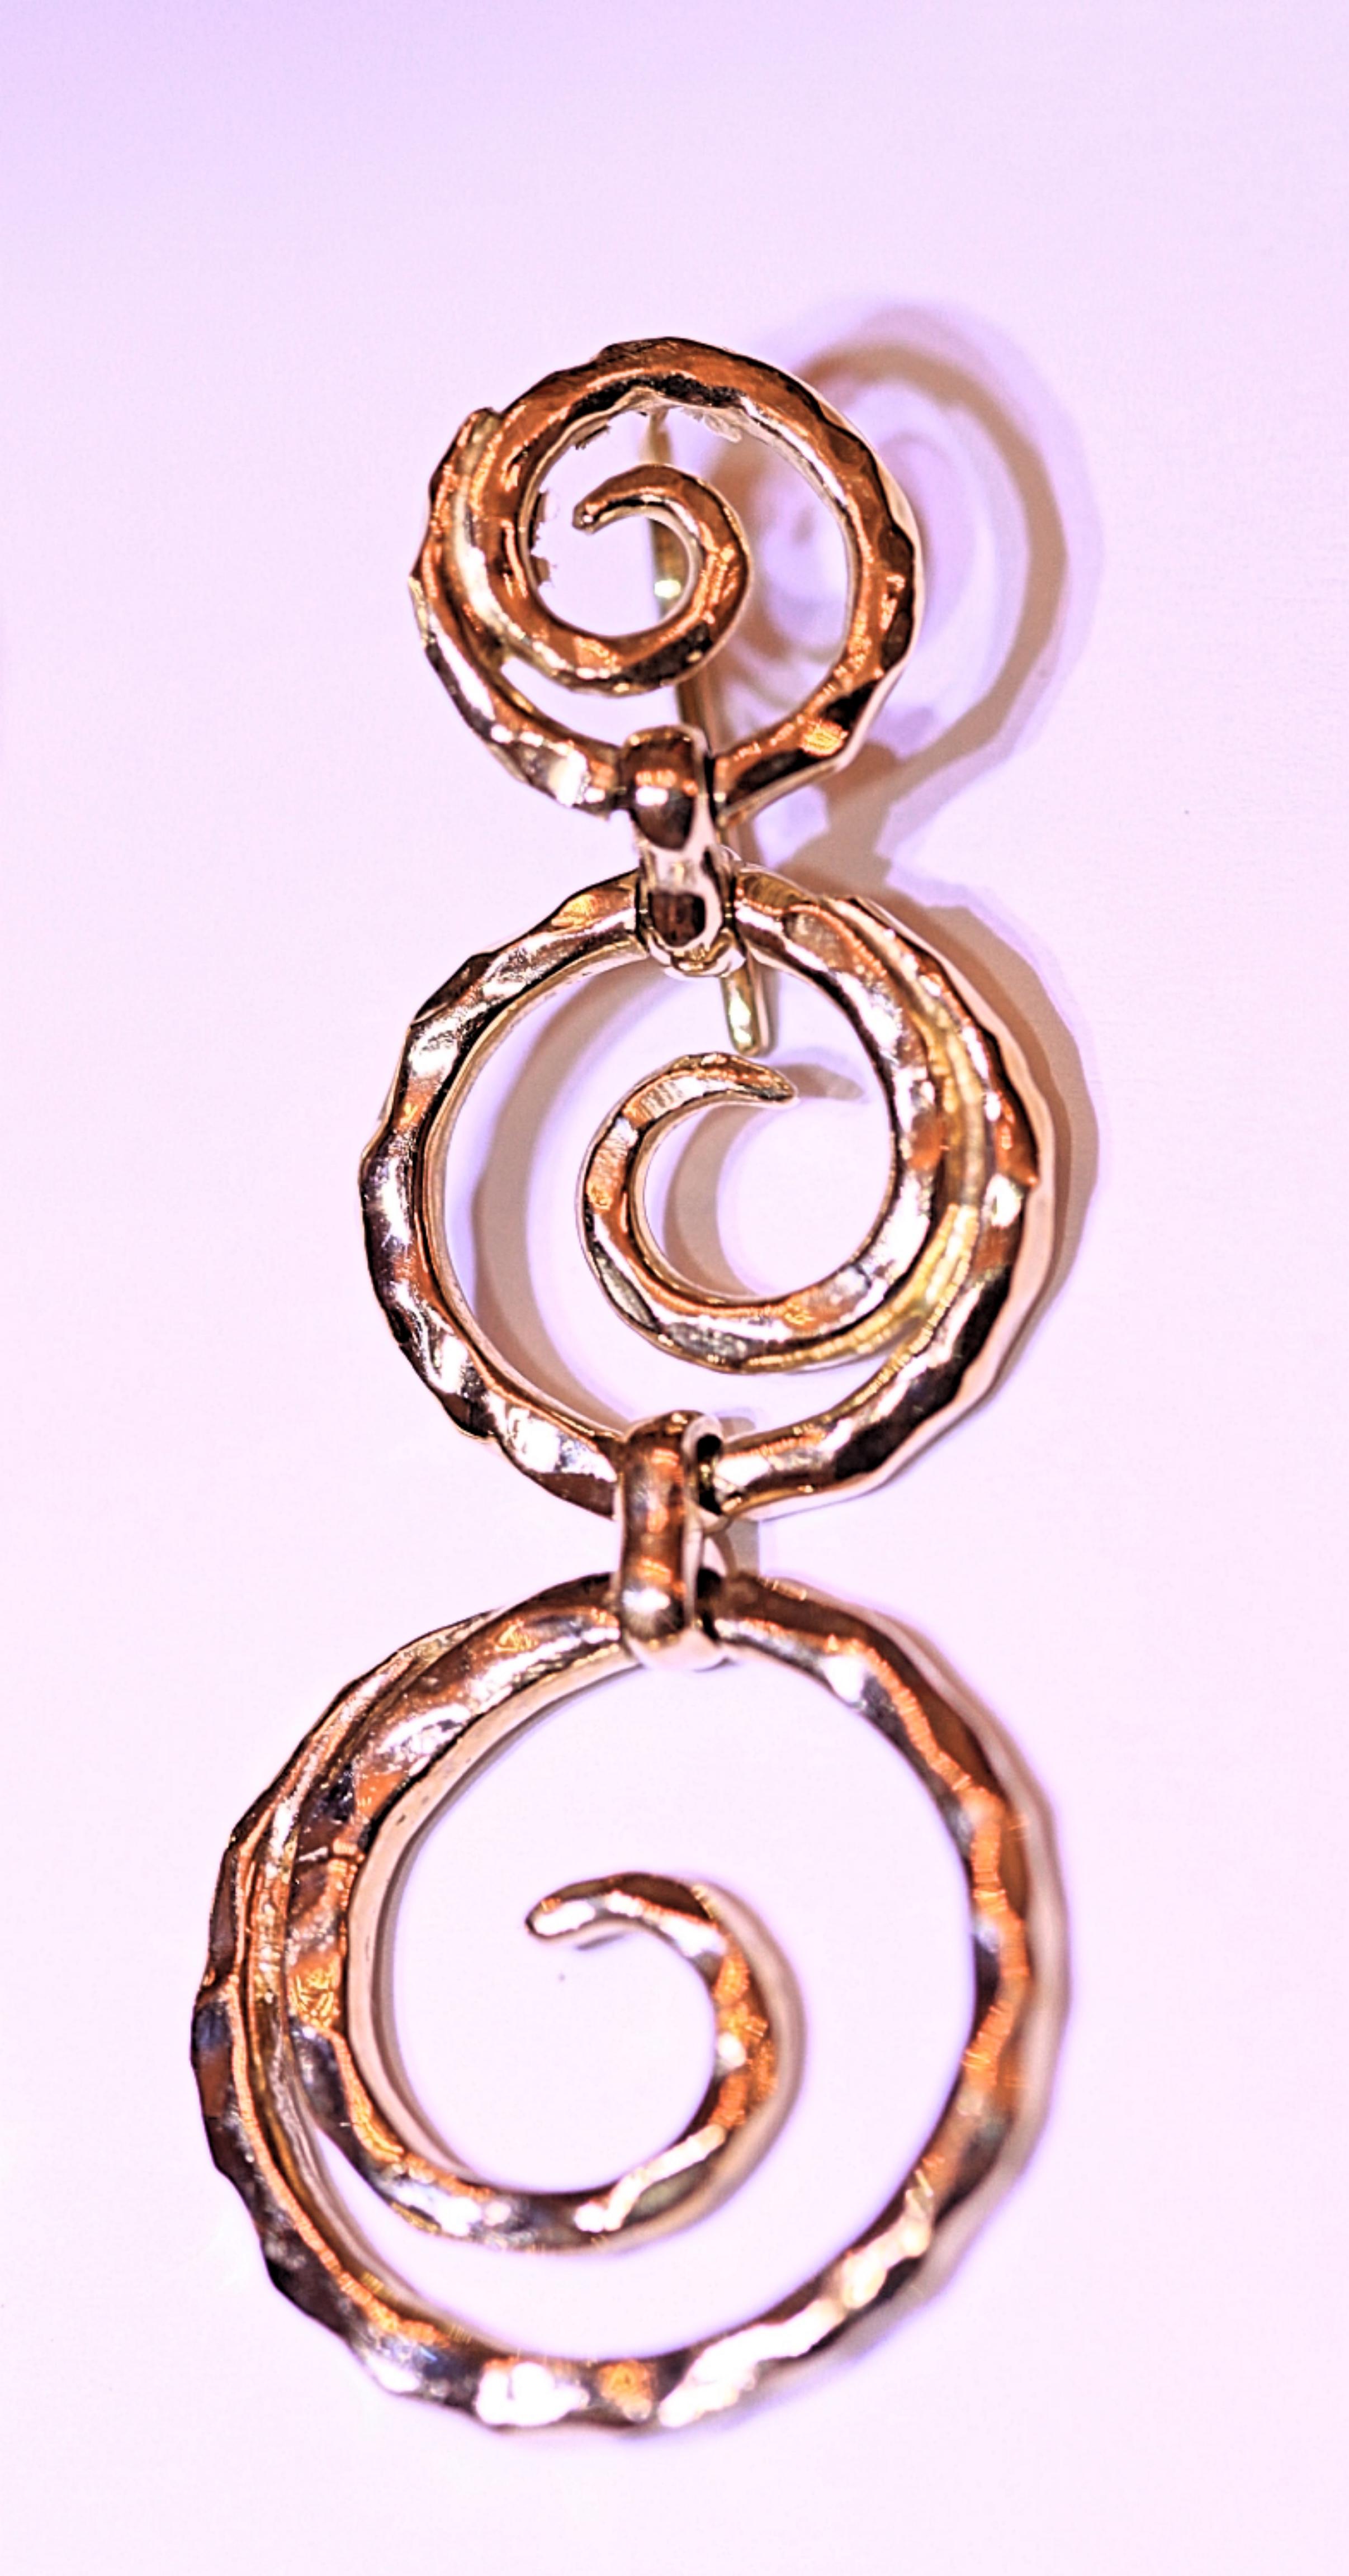 An exquisite pair of 18 karat yellow gold earrings.  The earrings were designed by Sal Praschnik and he calls them the wave design.  The earrings consist of three beautiful circles that dangle 2 inches long and they are 3/4 inches wide.  The circles